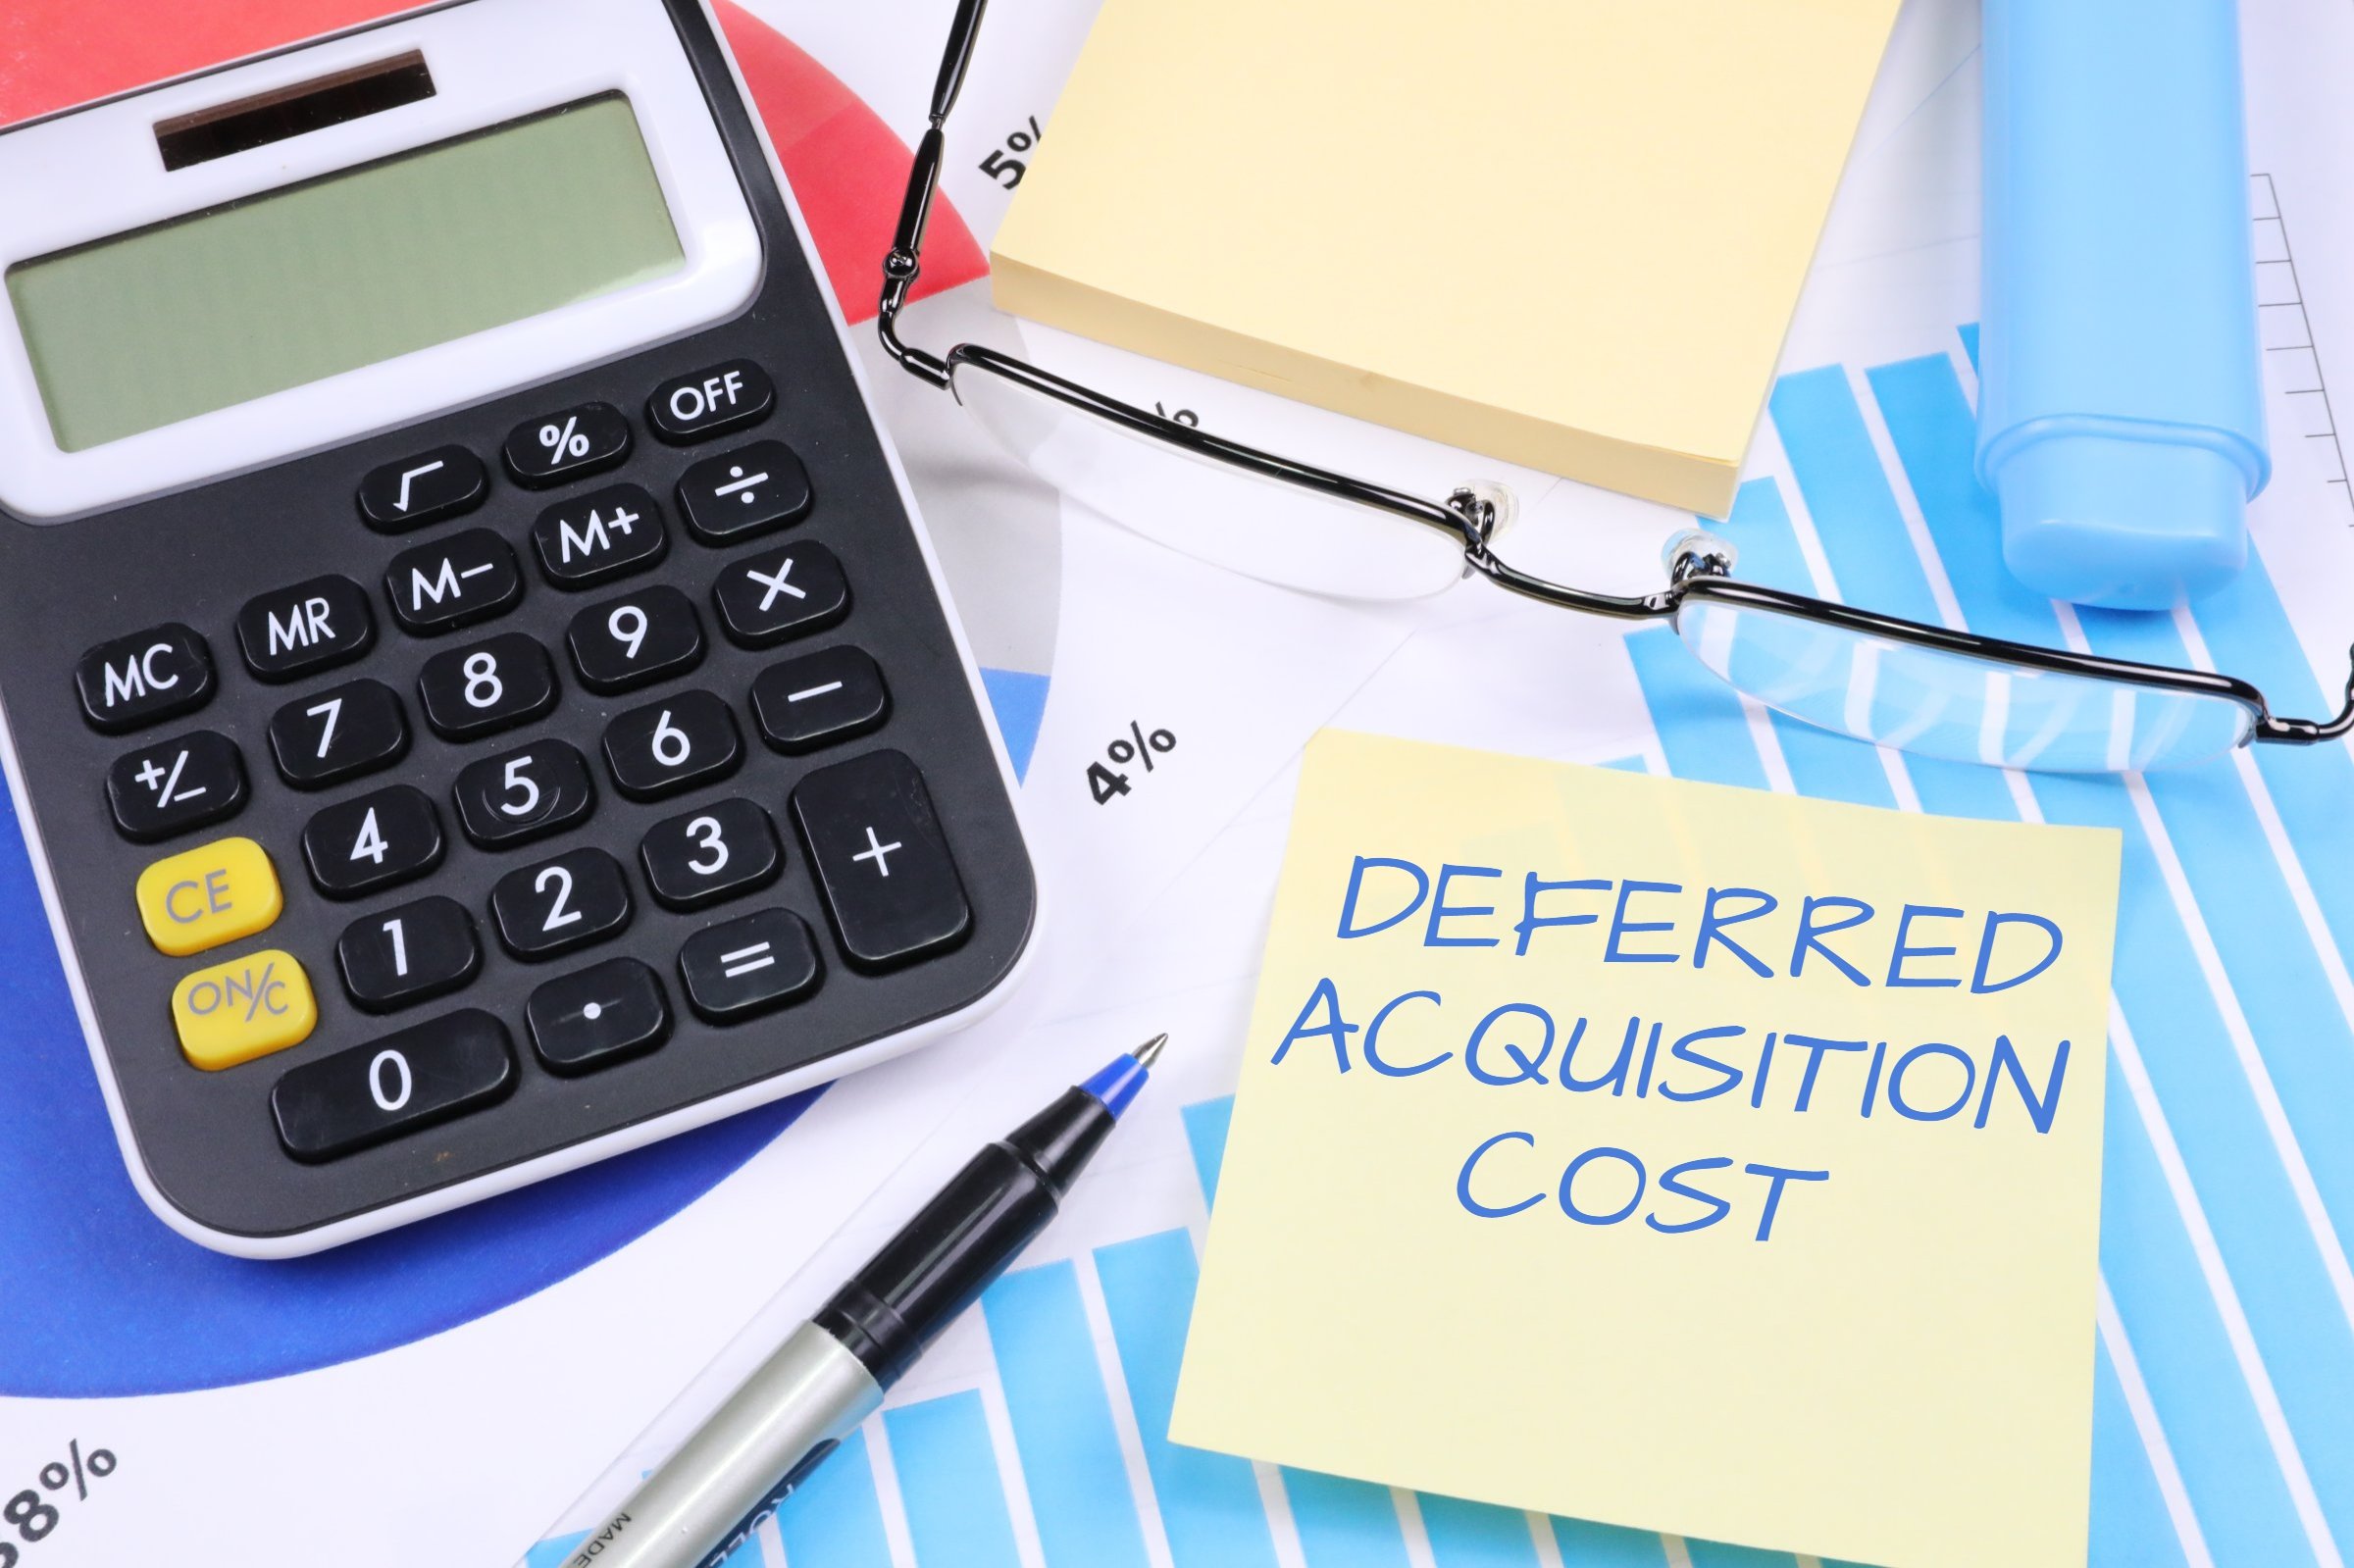 Deferred Acquisition Cost